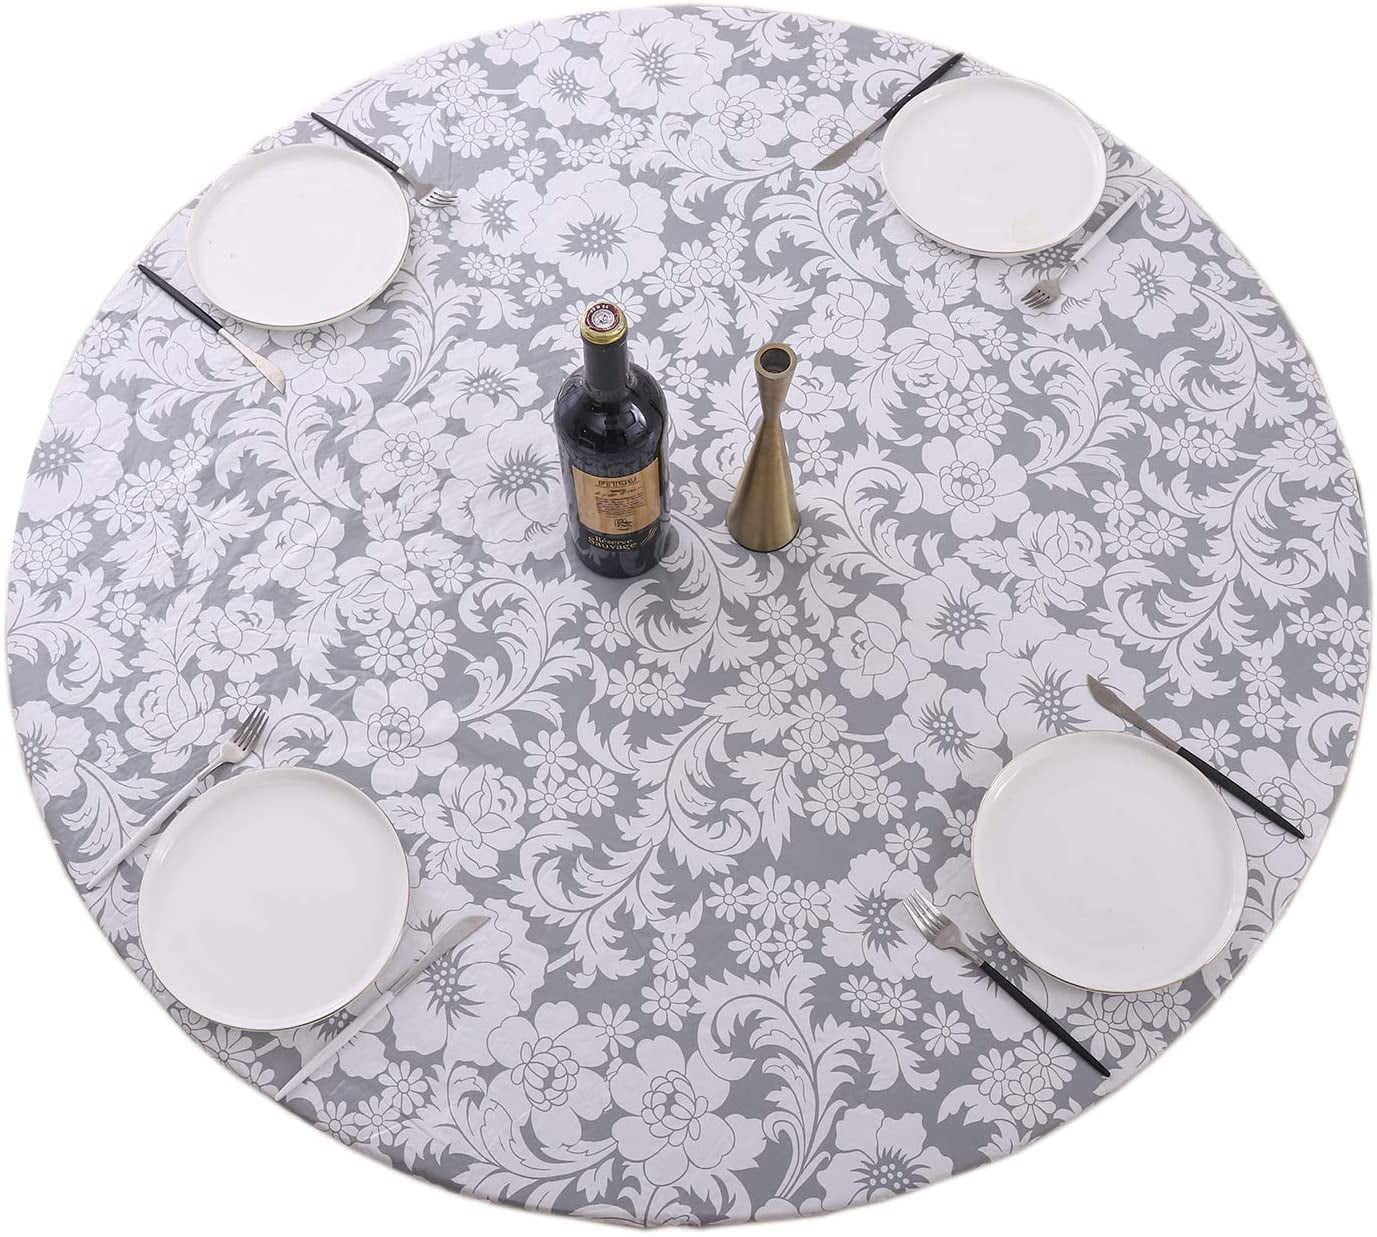 Round Vinyl Fitted Tablecloth W/ Flannel Backing Elastic Table Cover Waterproof 